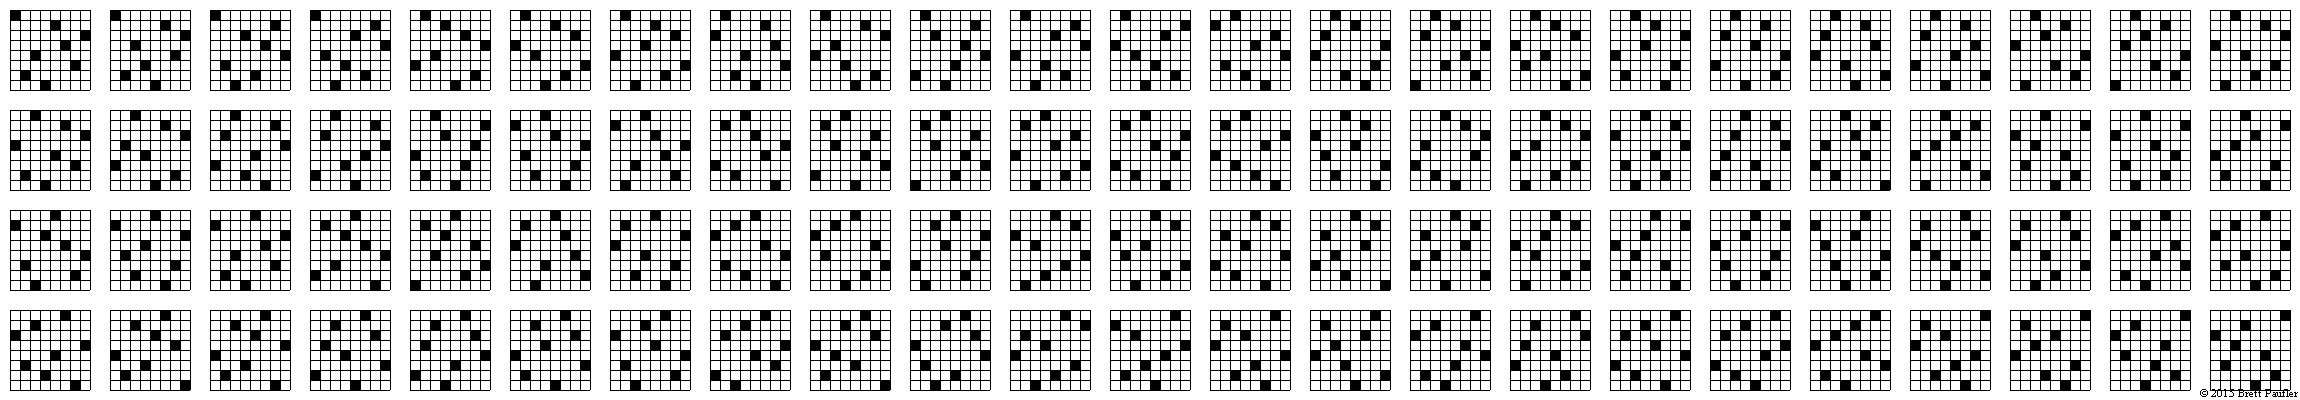 Pictorial Representation of the Eight Queens Problem Solution Set of all 92 answers